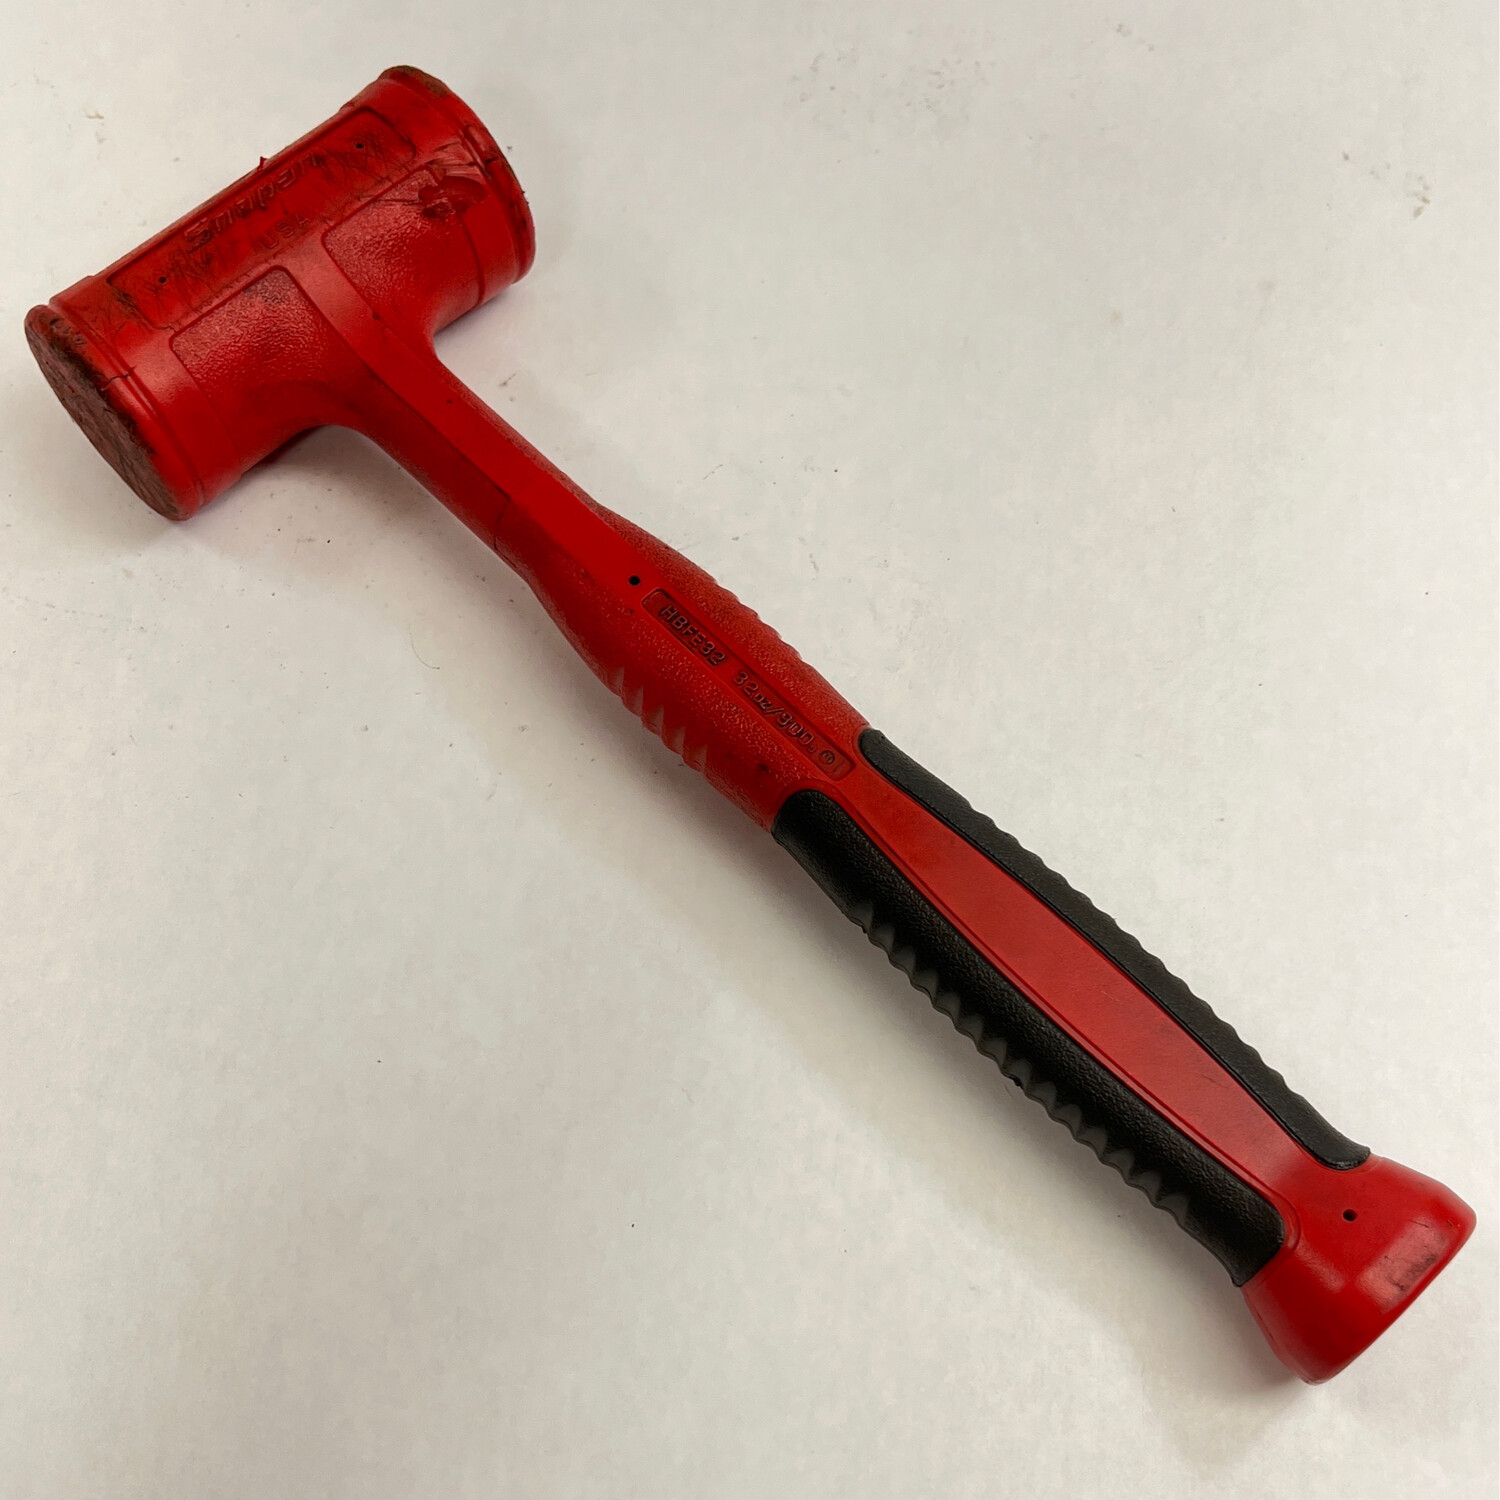 Snap On 32 oz Soft Grip Dead Blow Hammer, HBFE32